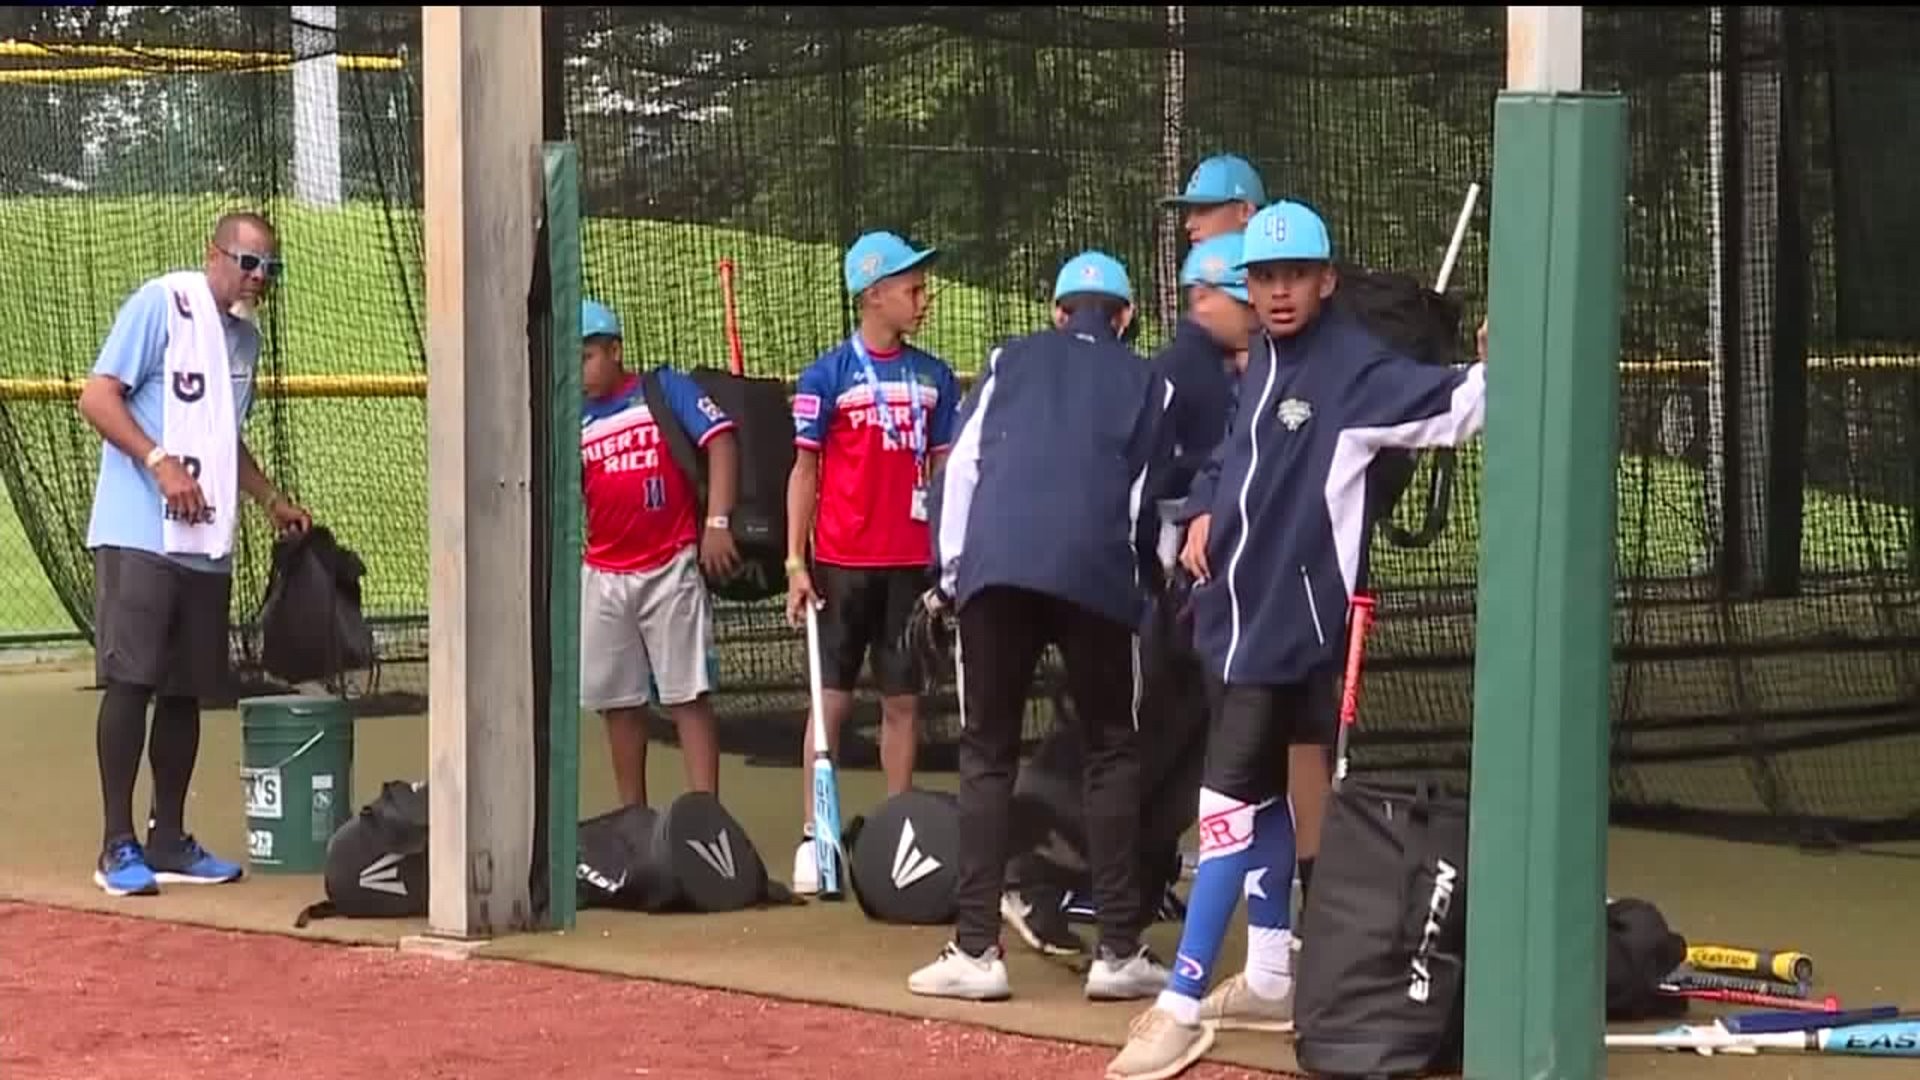 'A dream come true' - Caribbean Team Endures Hurricane Hardships to Play in World Series